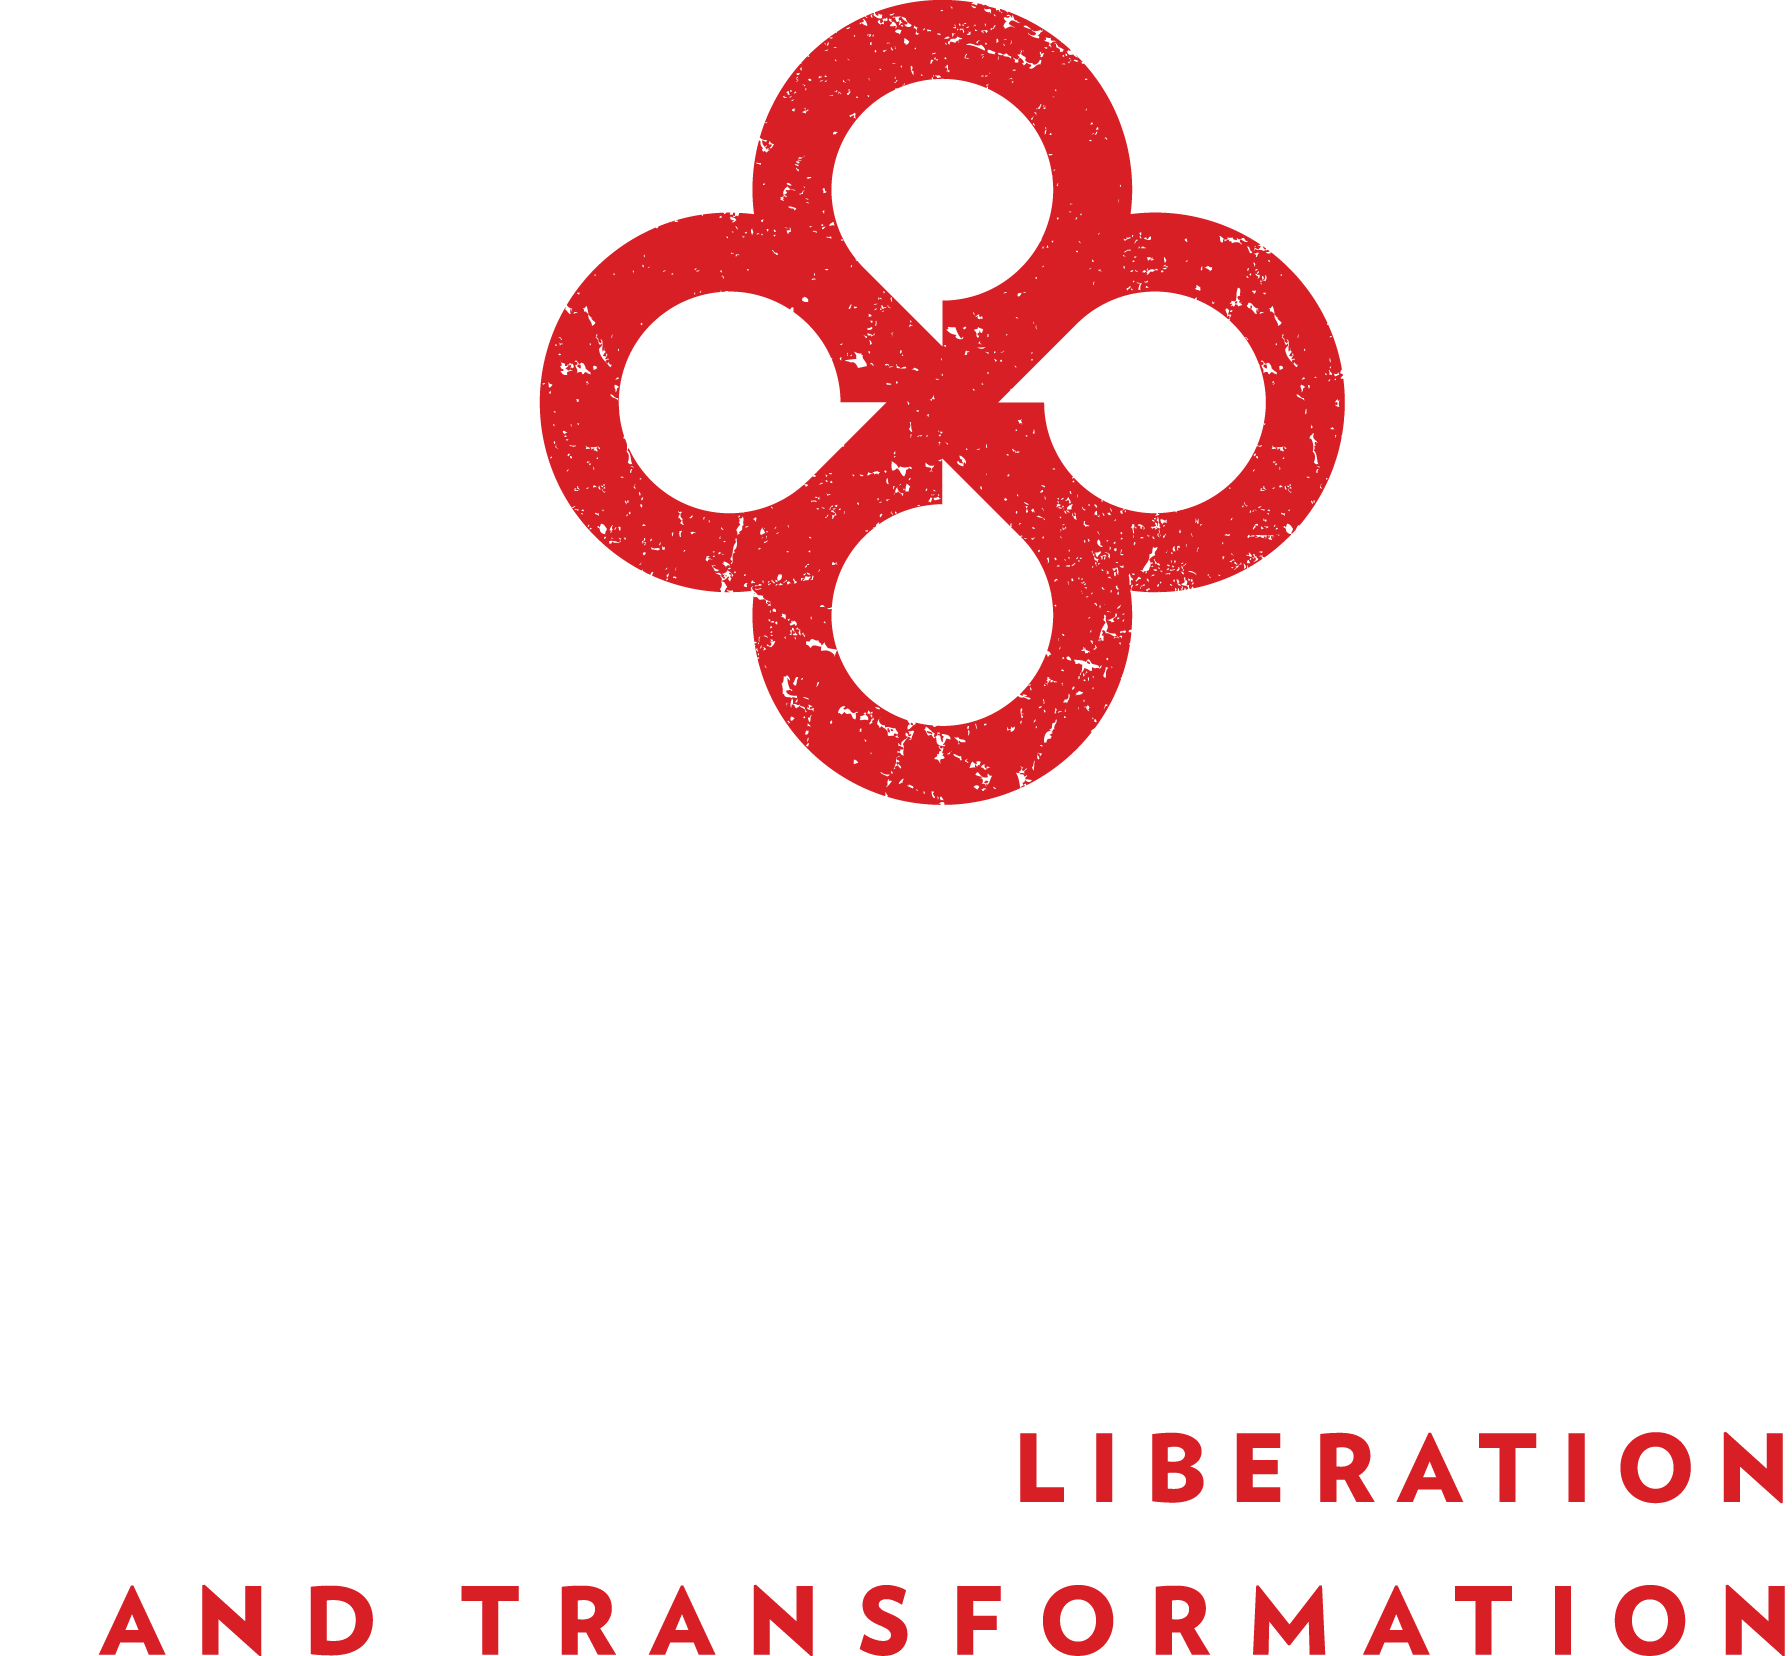 The Voices School for Liberation and Transformation